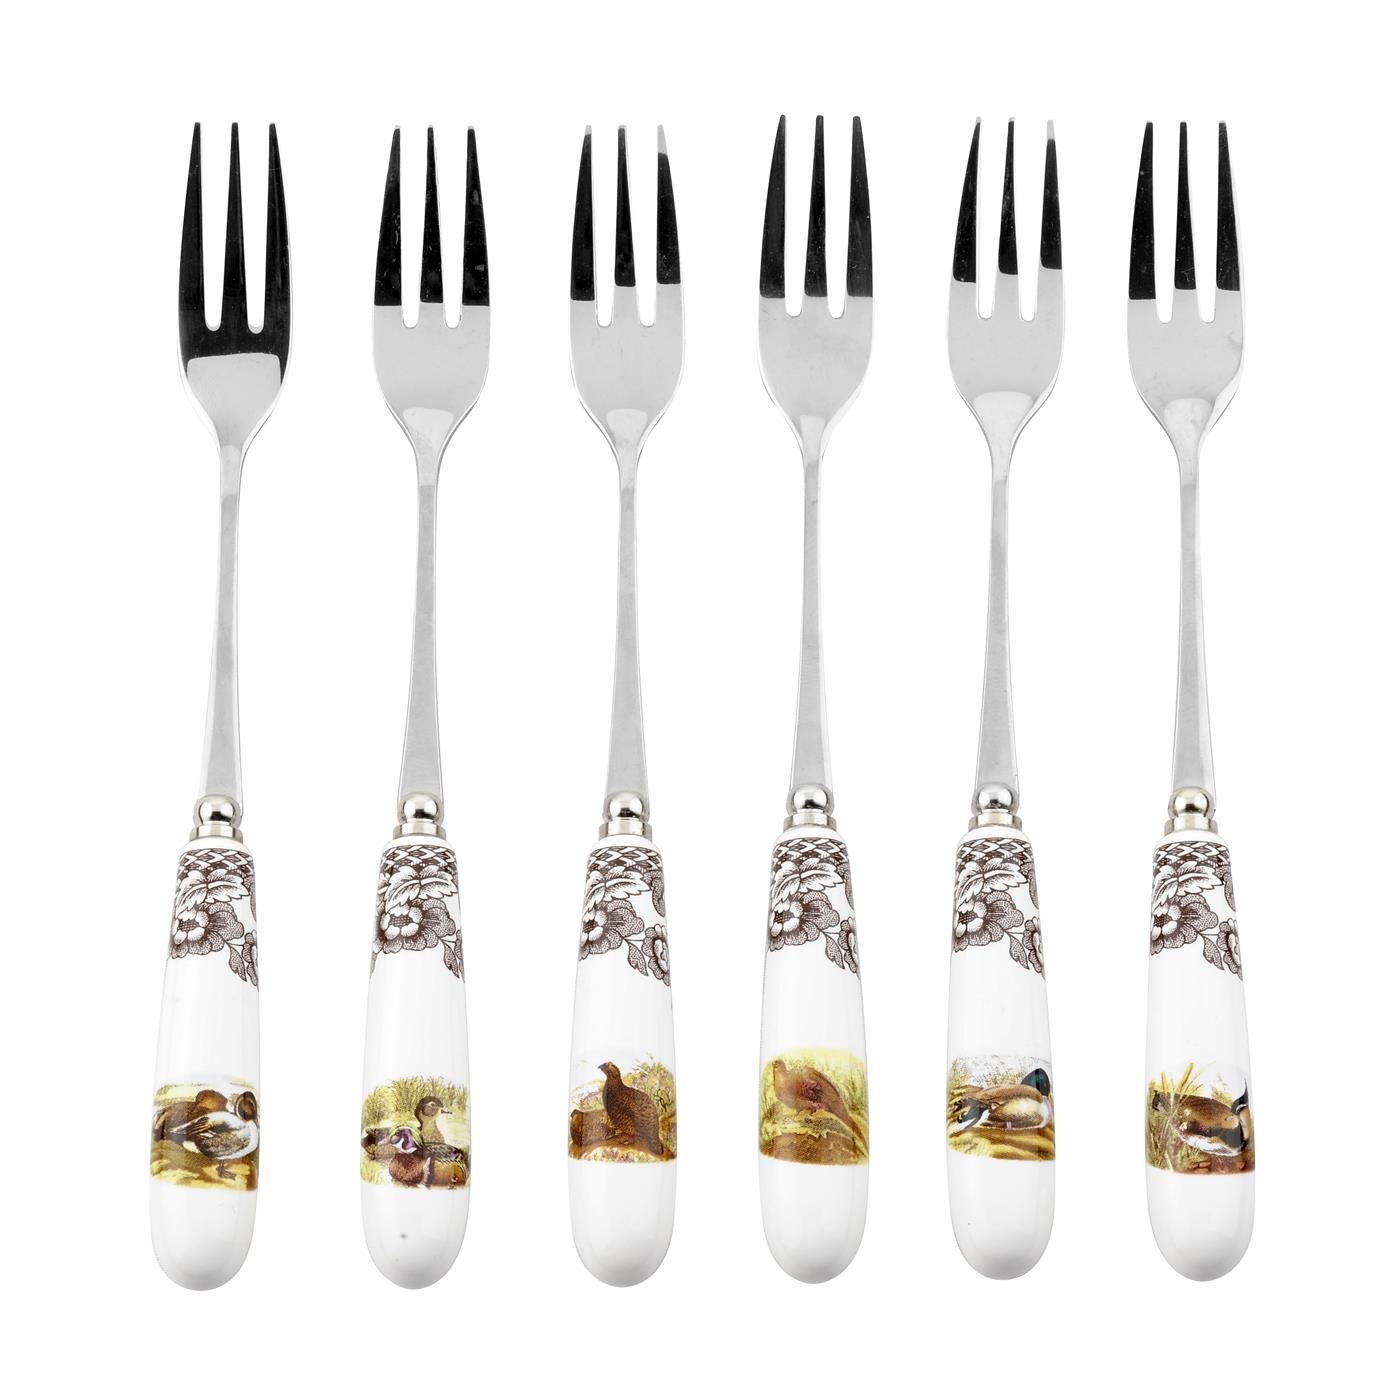 MAM Dessert Fork 1090, set of six pastry forks  Advantageously shopping at